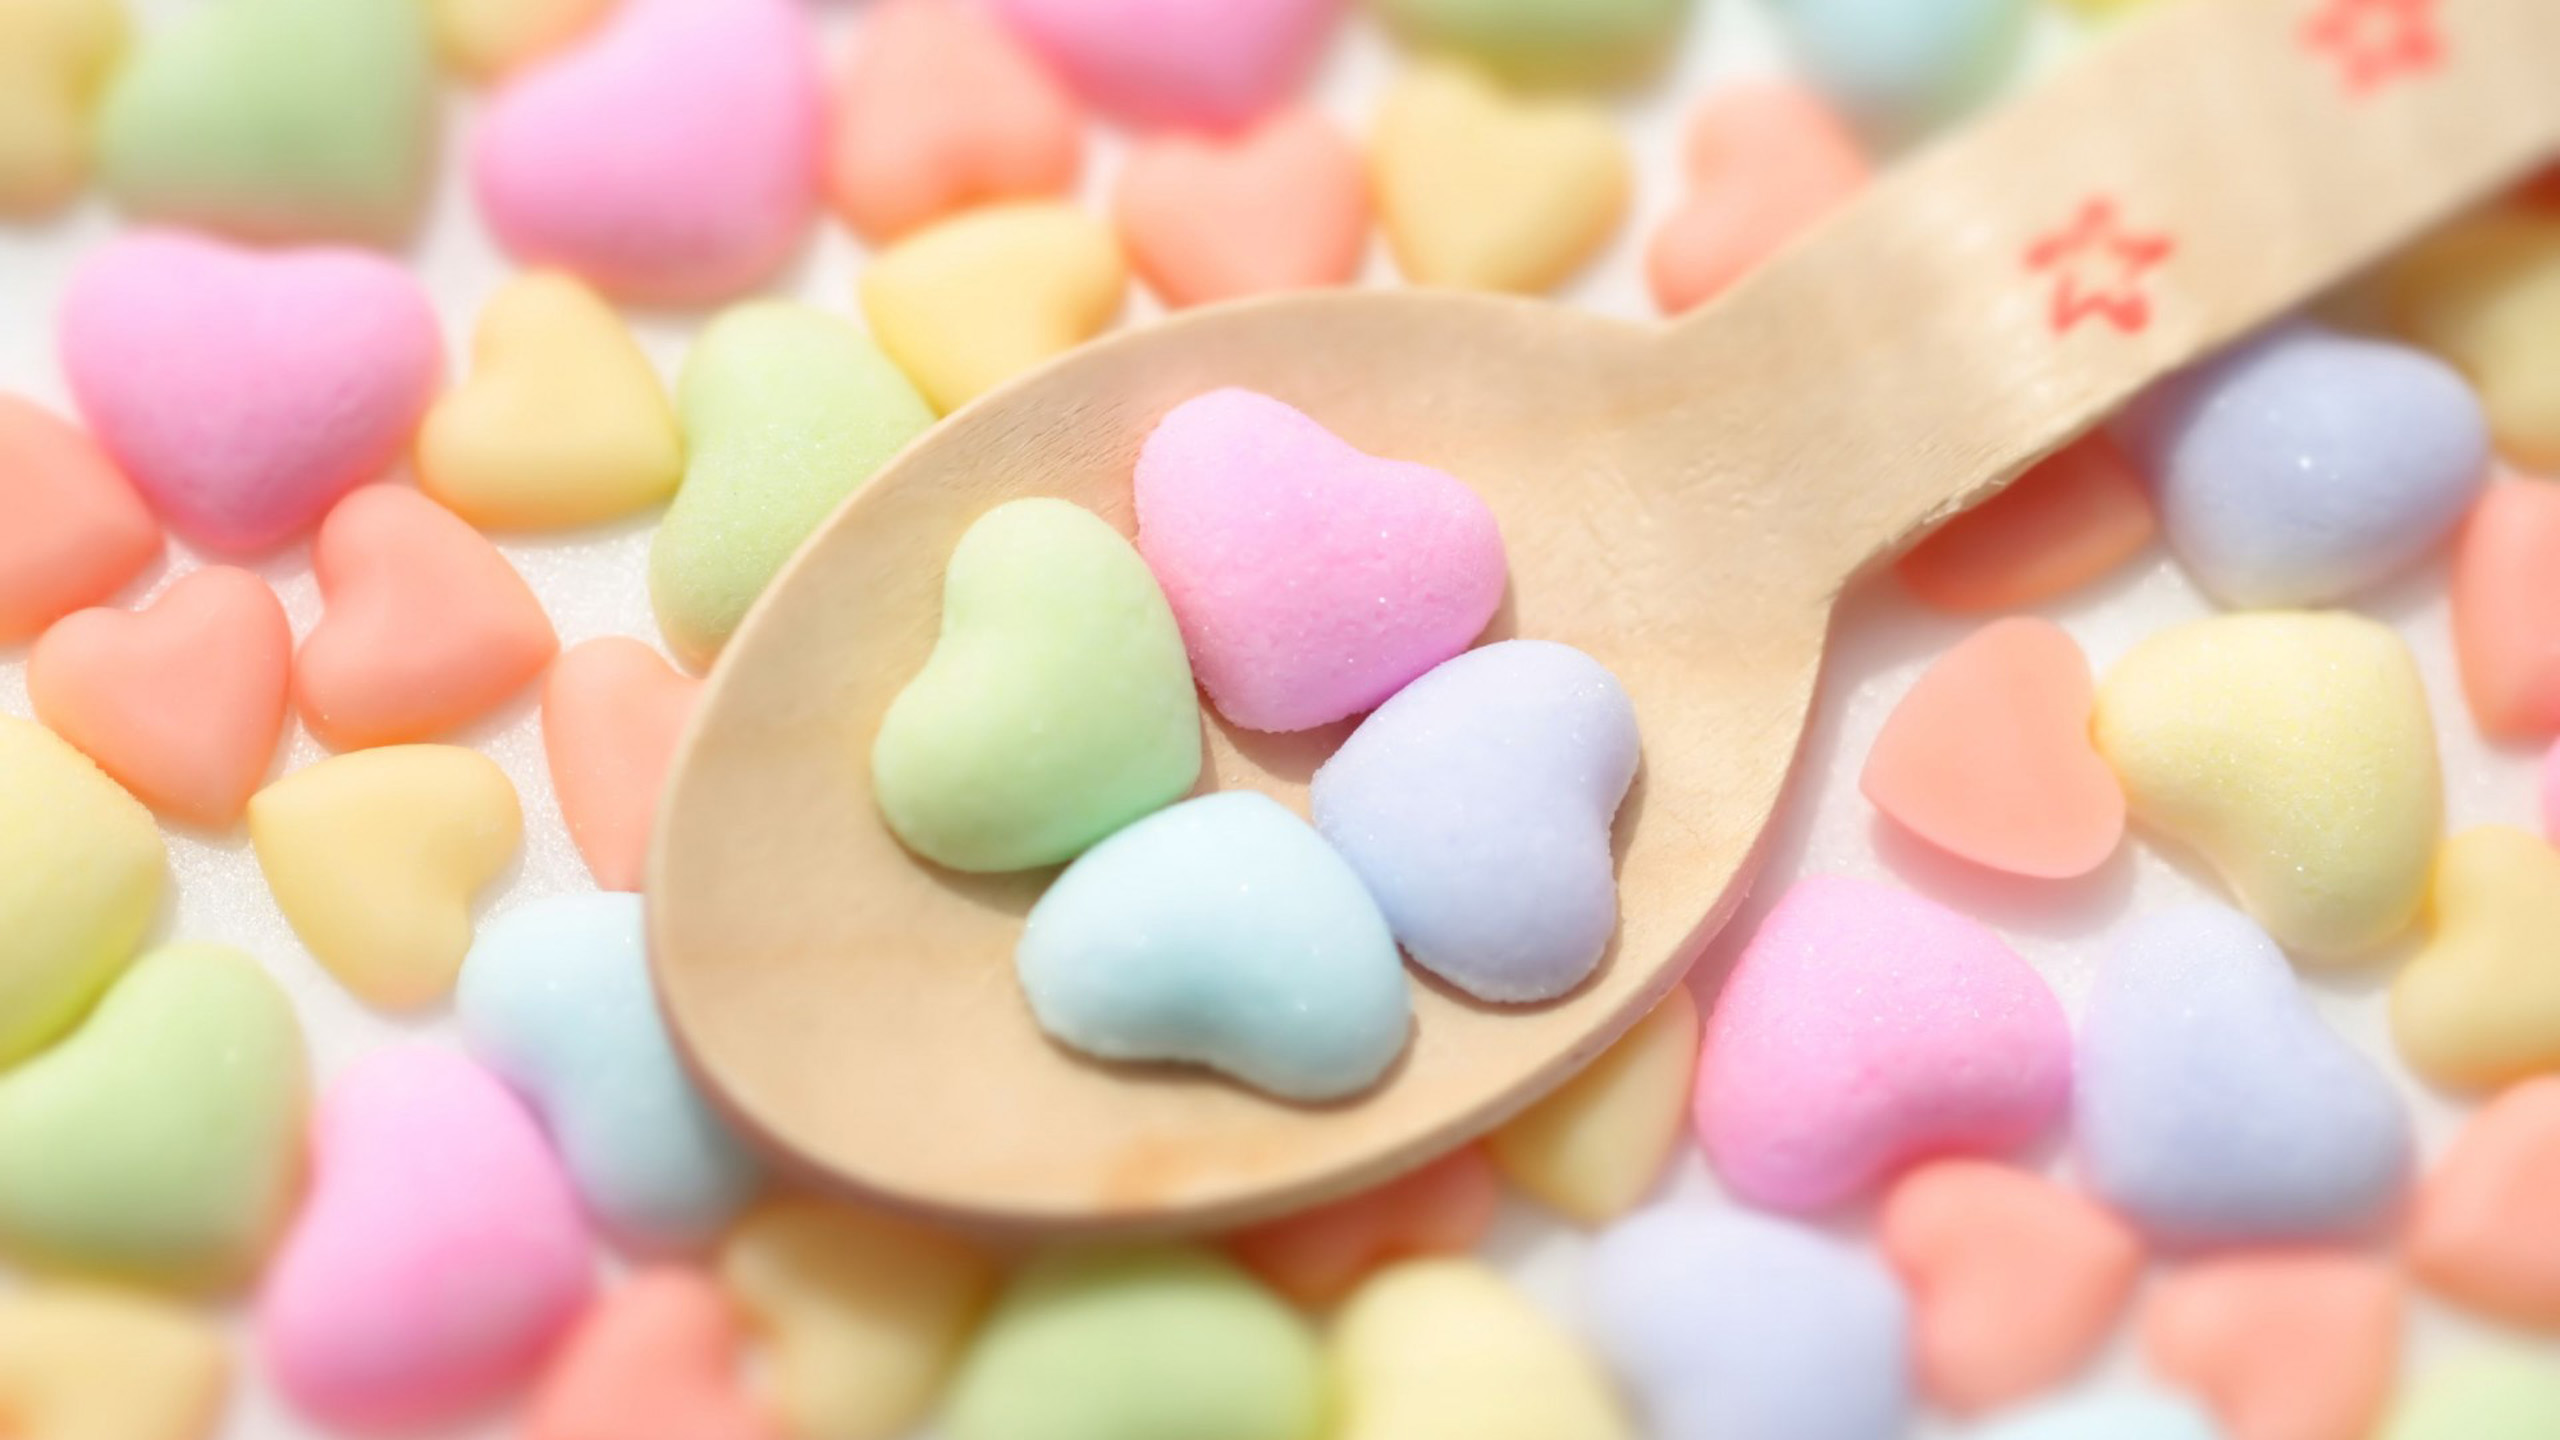 candy wallpaper hd,sweetness,food,confectionery,sweethearts,marshmallow